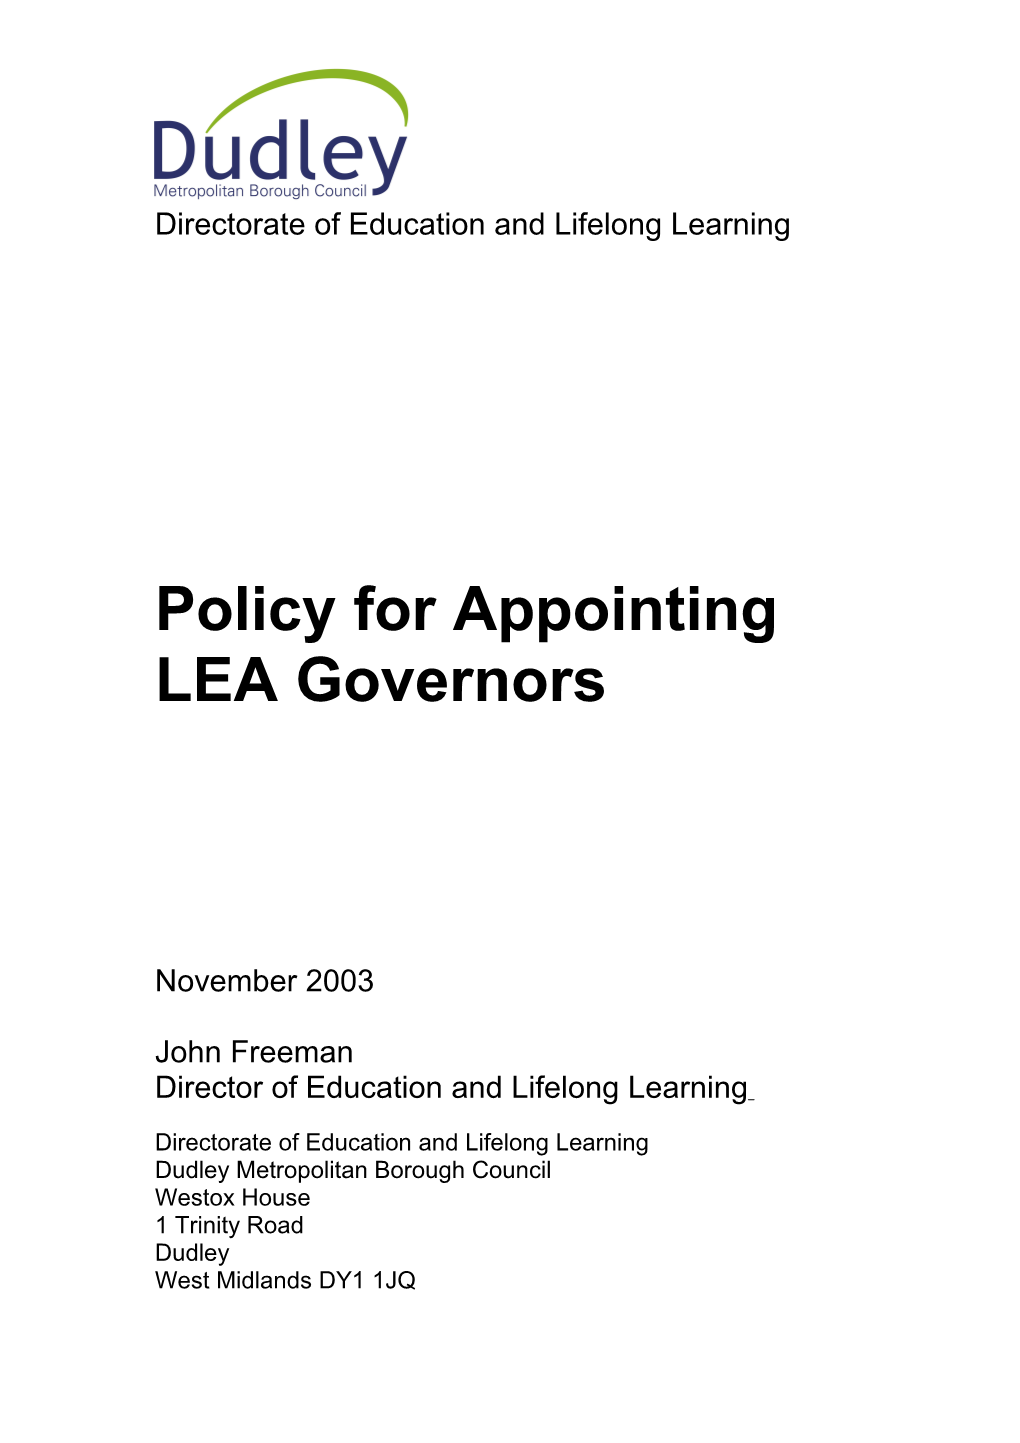 Policy for Appointing LEA Governors